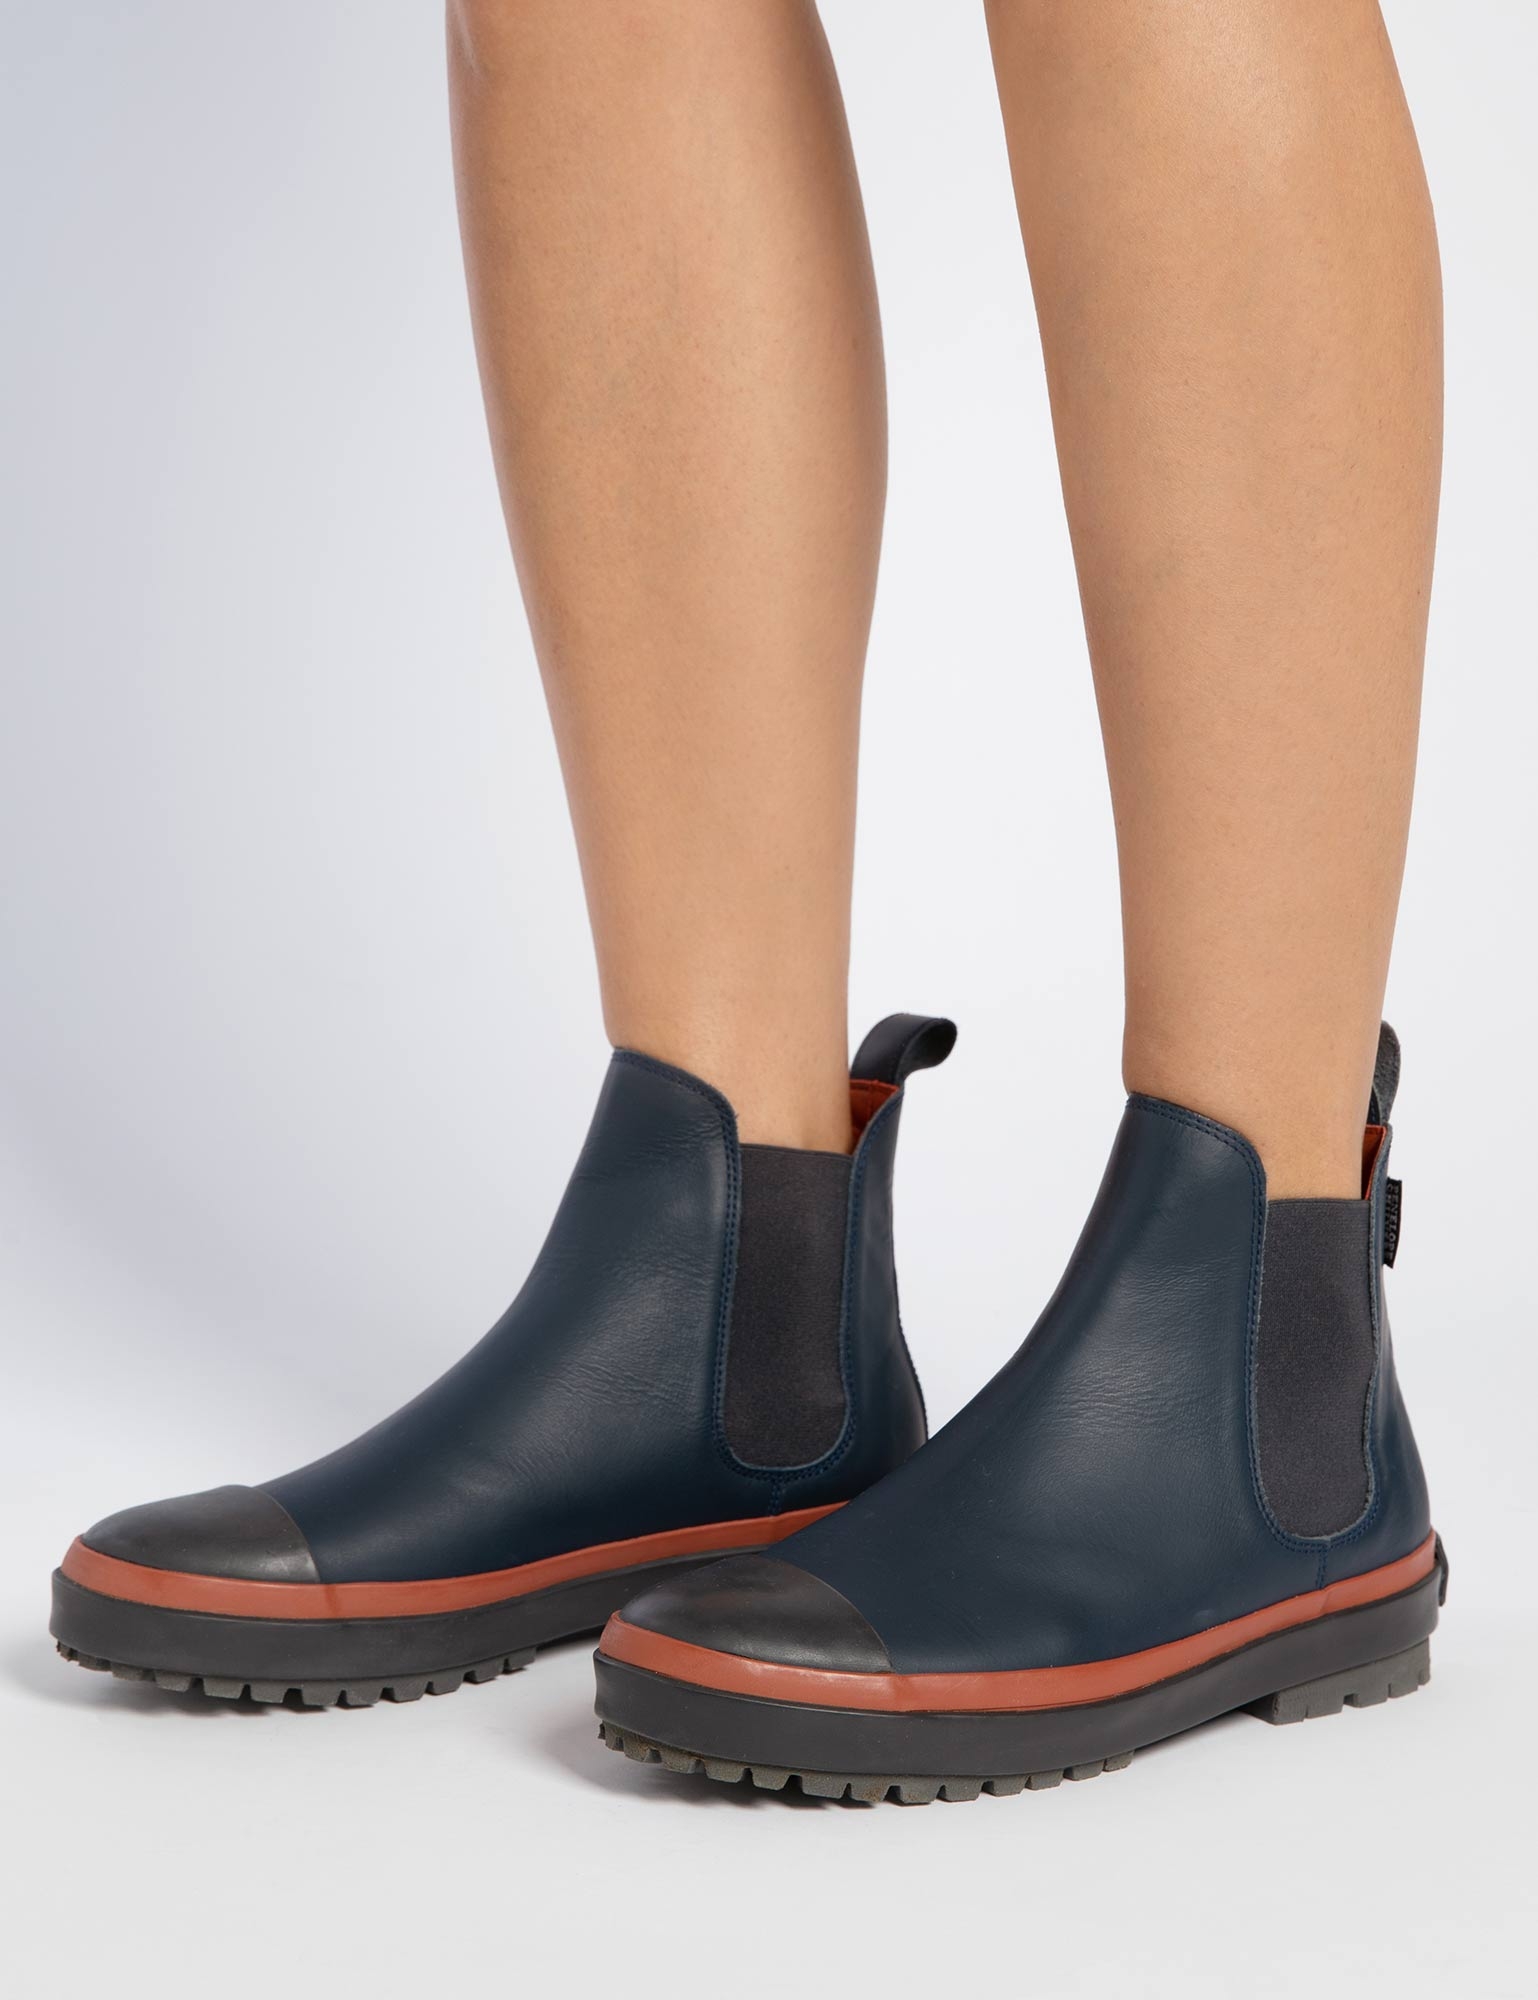 Jump Waterproof Leather Boot | Women's Boot | Penelope Chilvers